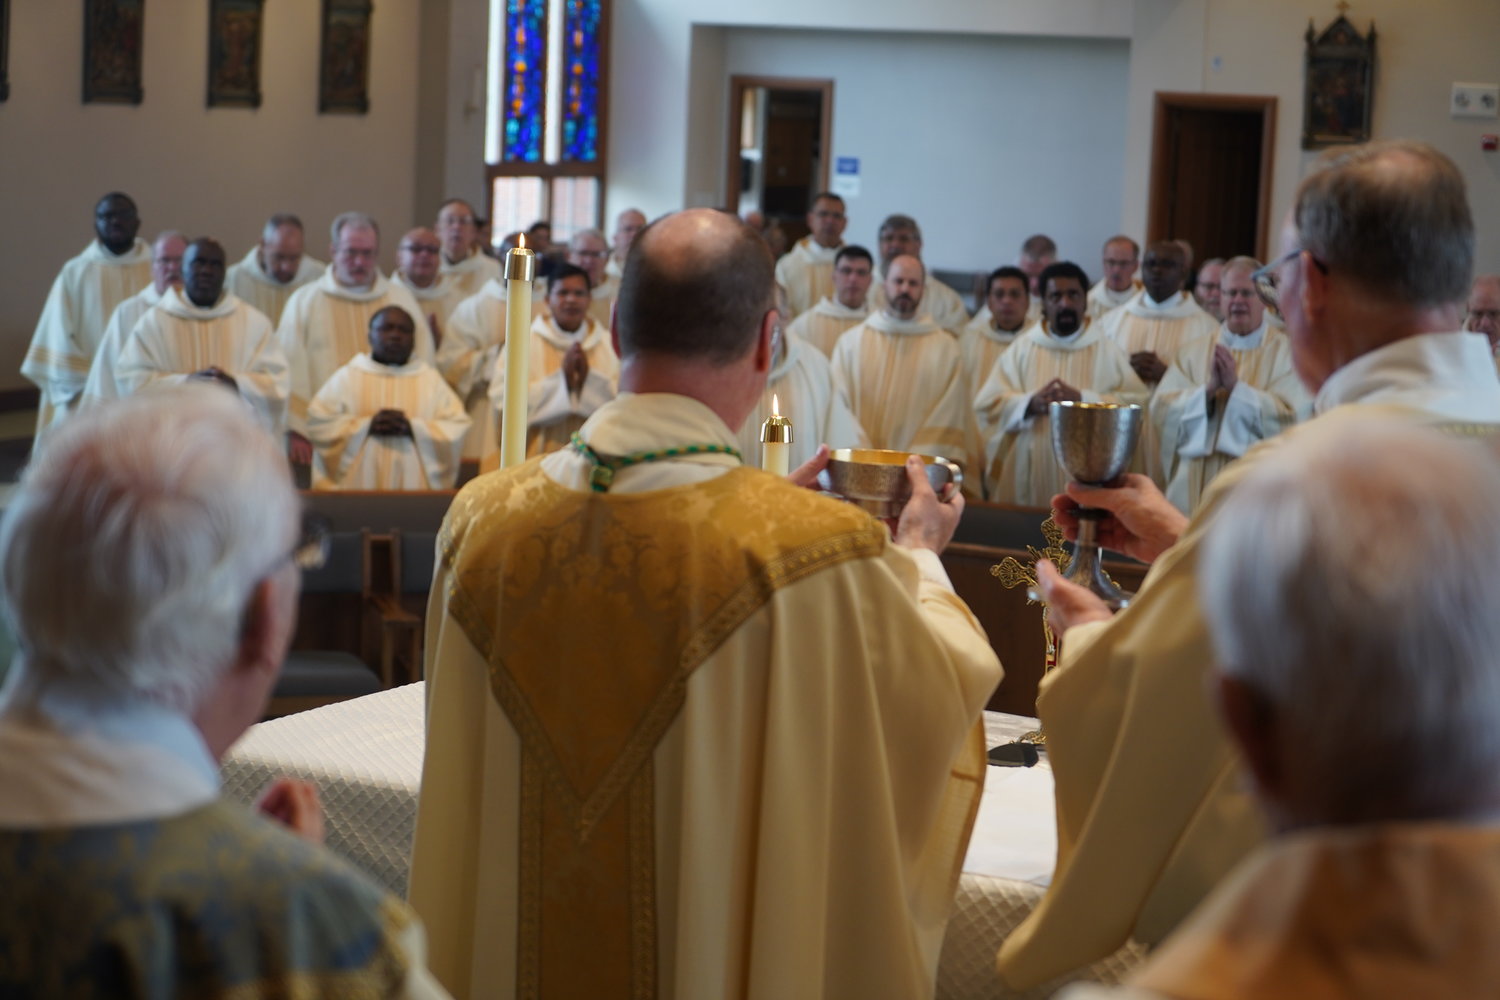 Bishop W. Shawn McKnight, assisted by Deacon John Schwartze, elevates the Most Blessed Sacrament while he and priests of the diocese pray the Doxology together during the Chrism Mass on April 12 in St. Andrew Church in Holts Summit. — Photo by Jay Nies